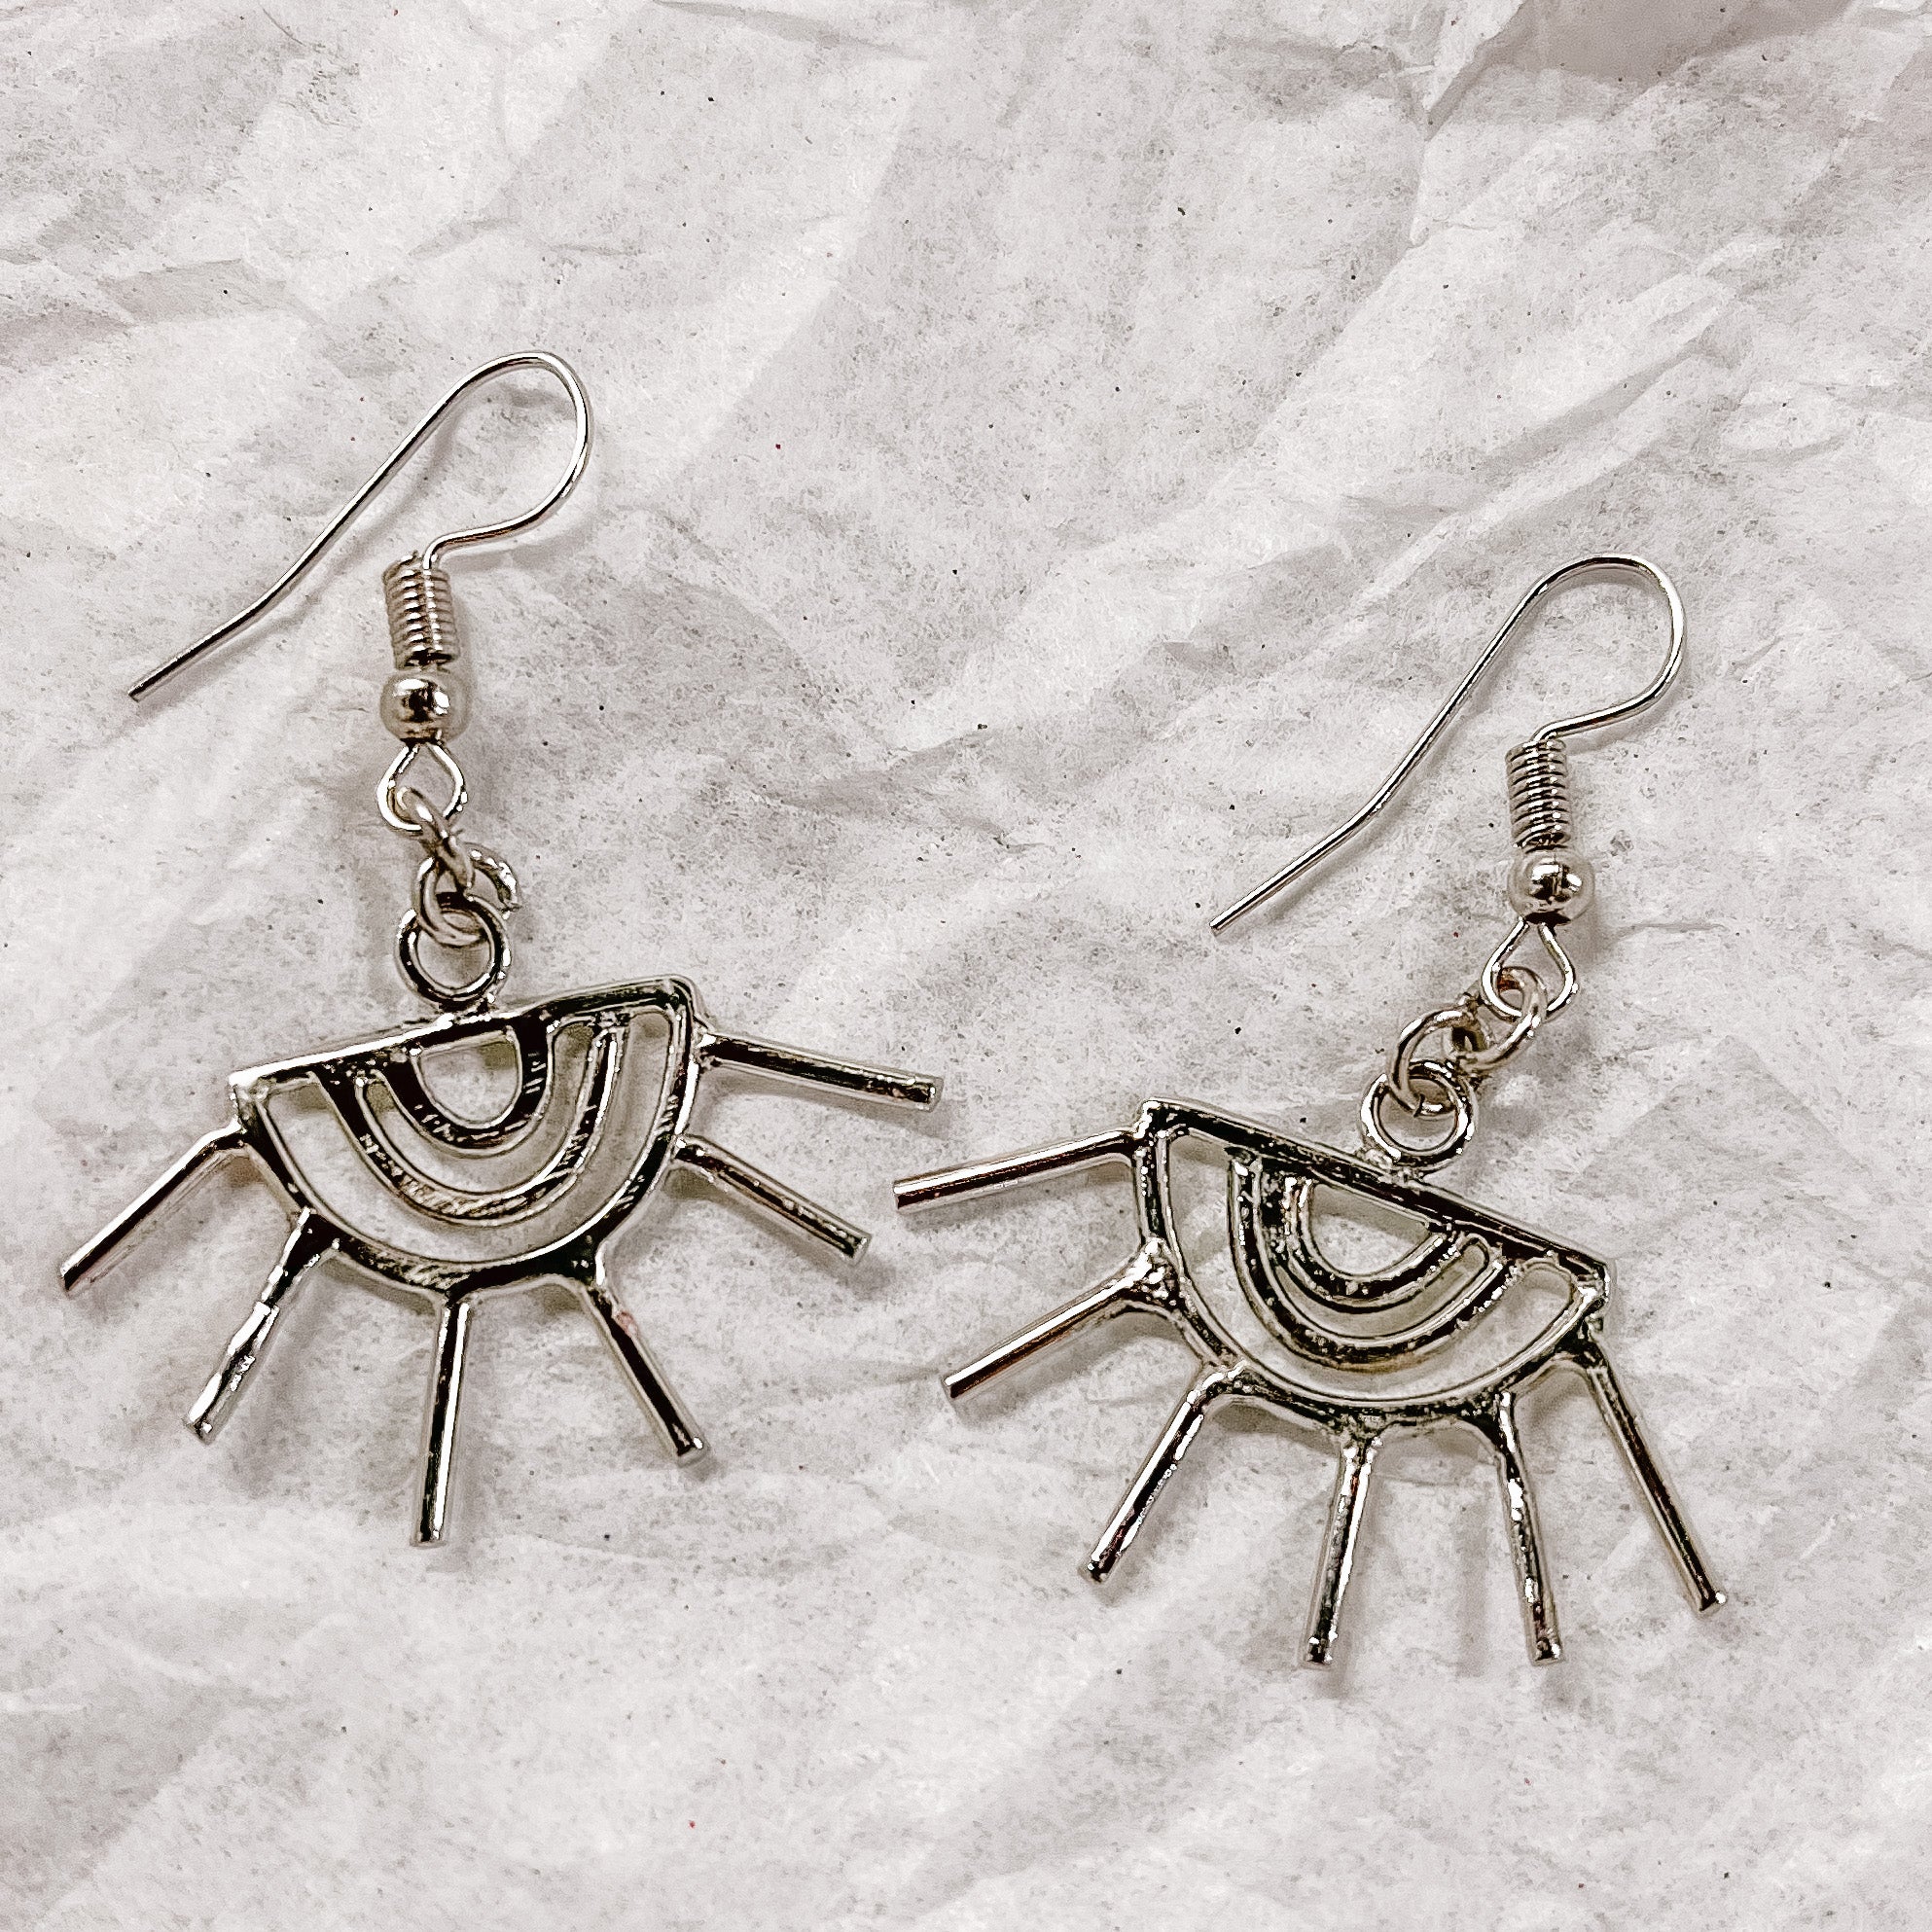 JustOne's silver eye shaped earrings with eyelashes sticking out of the earring, handcrafted in Kenya